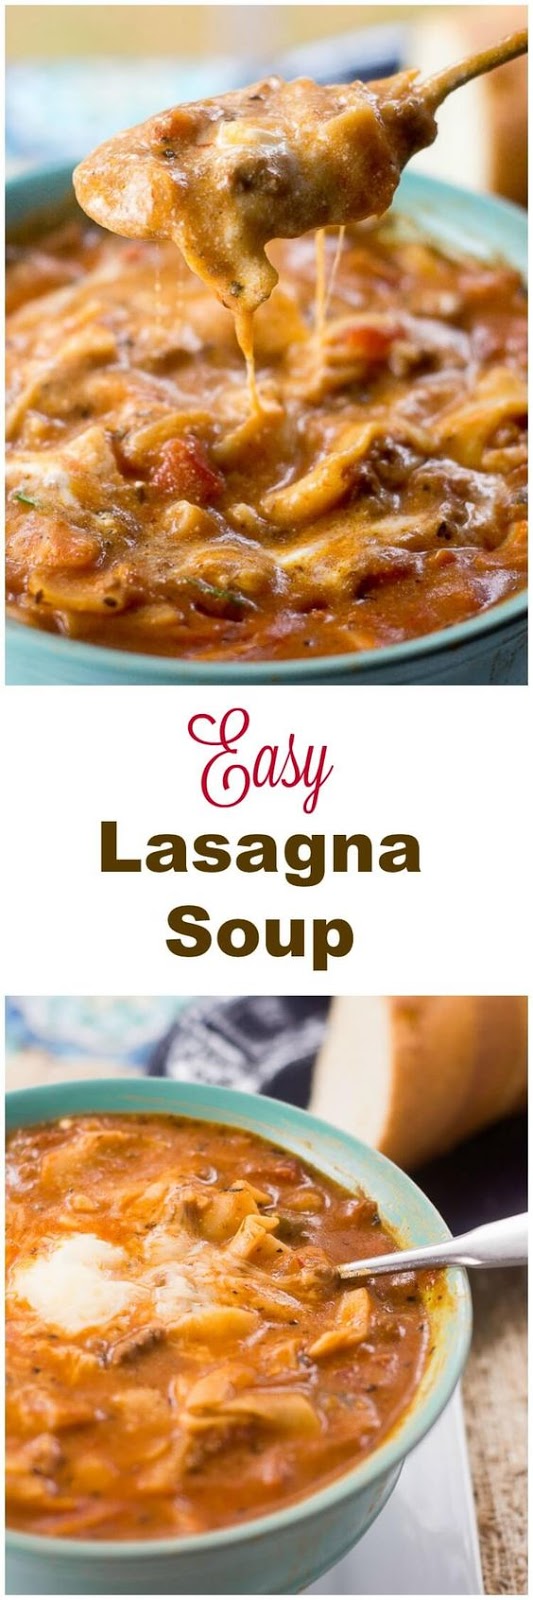 Easy Lasagna Soup Recipe - Girls Dishes